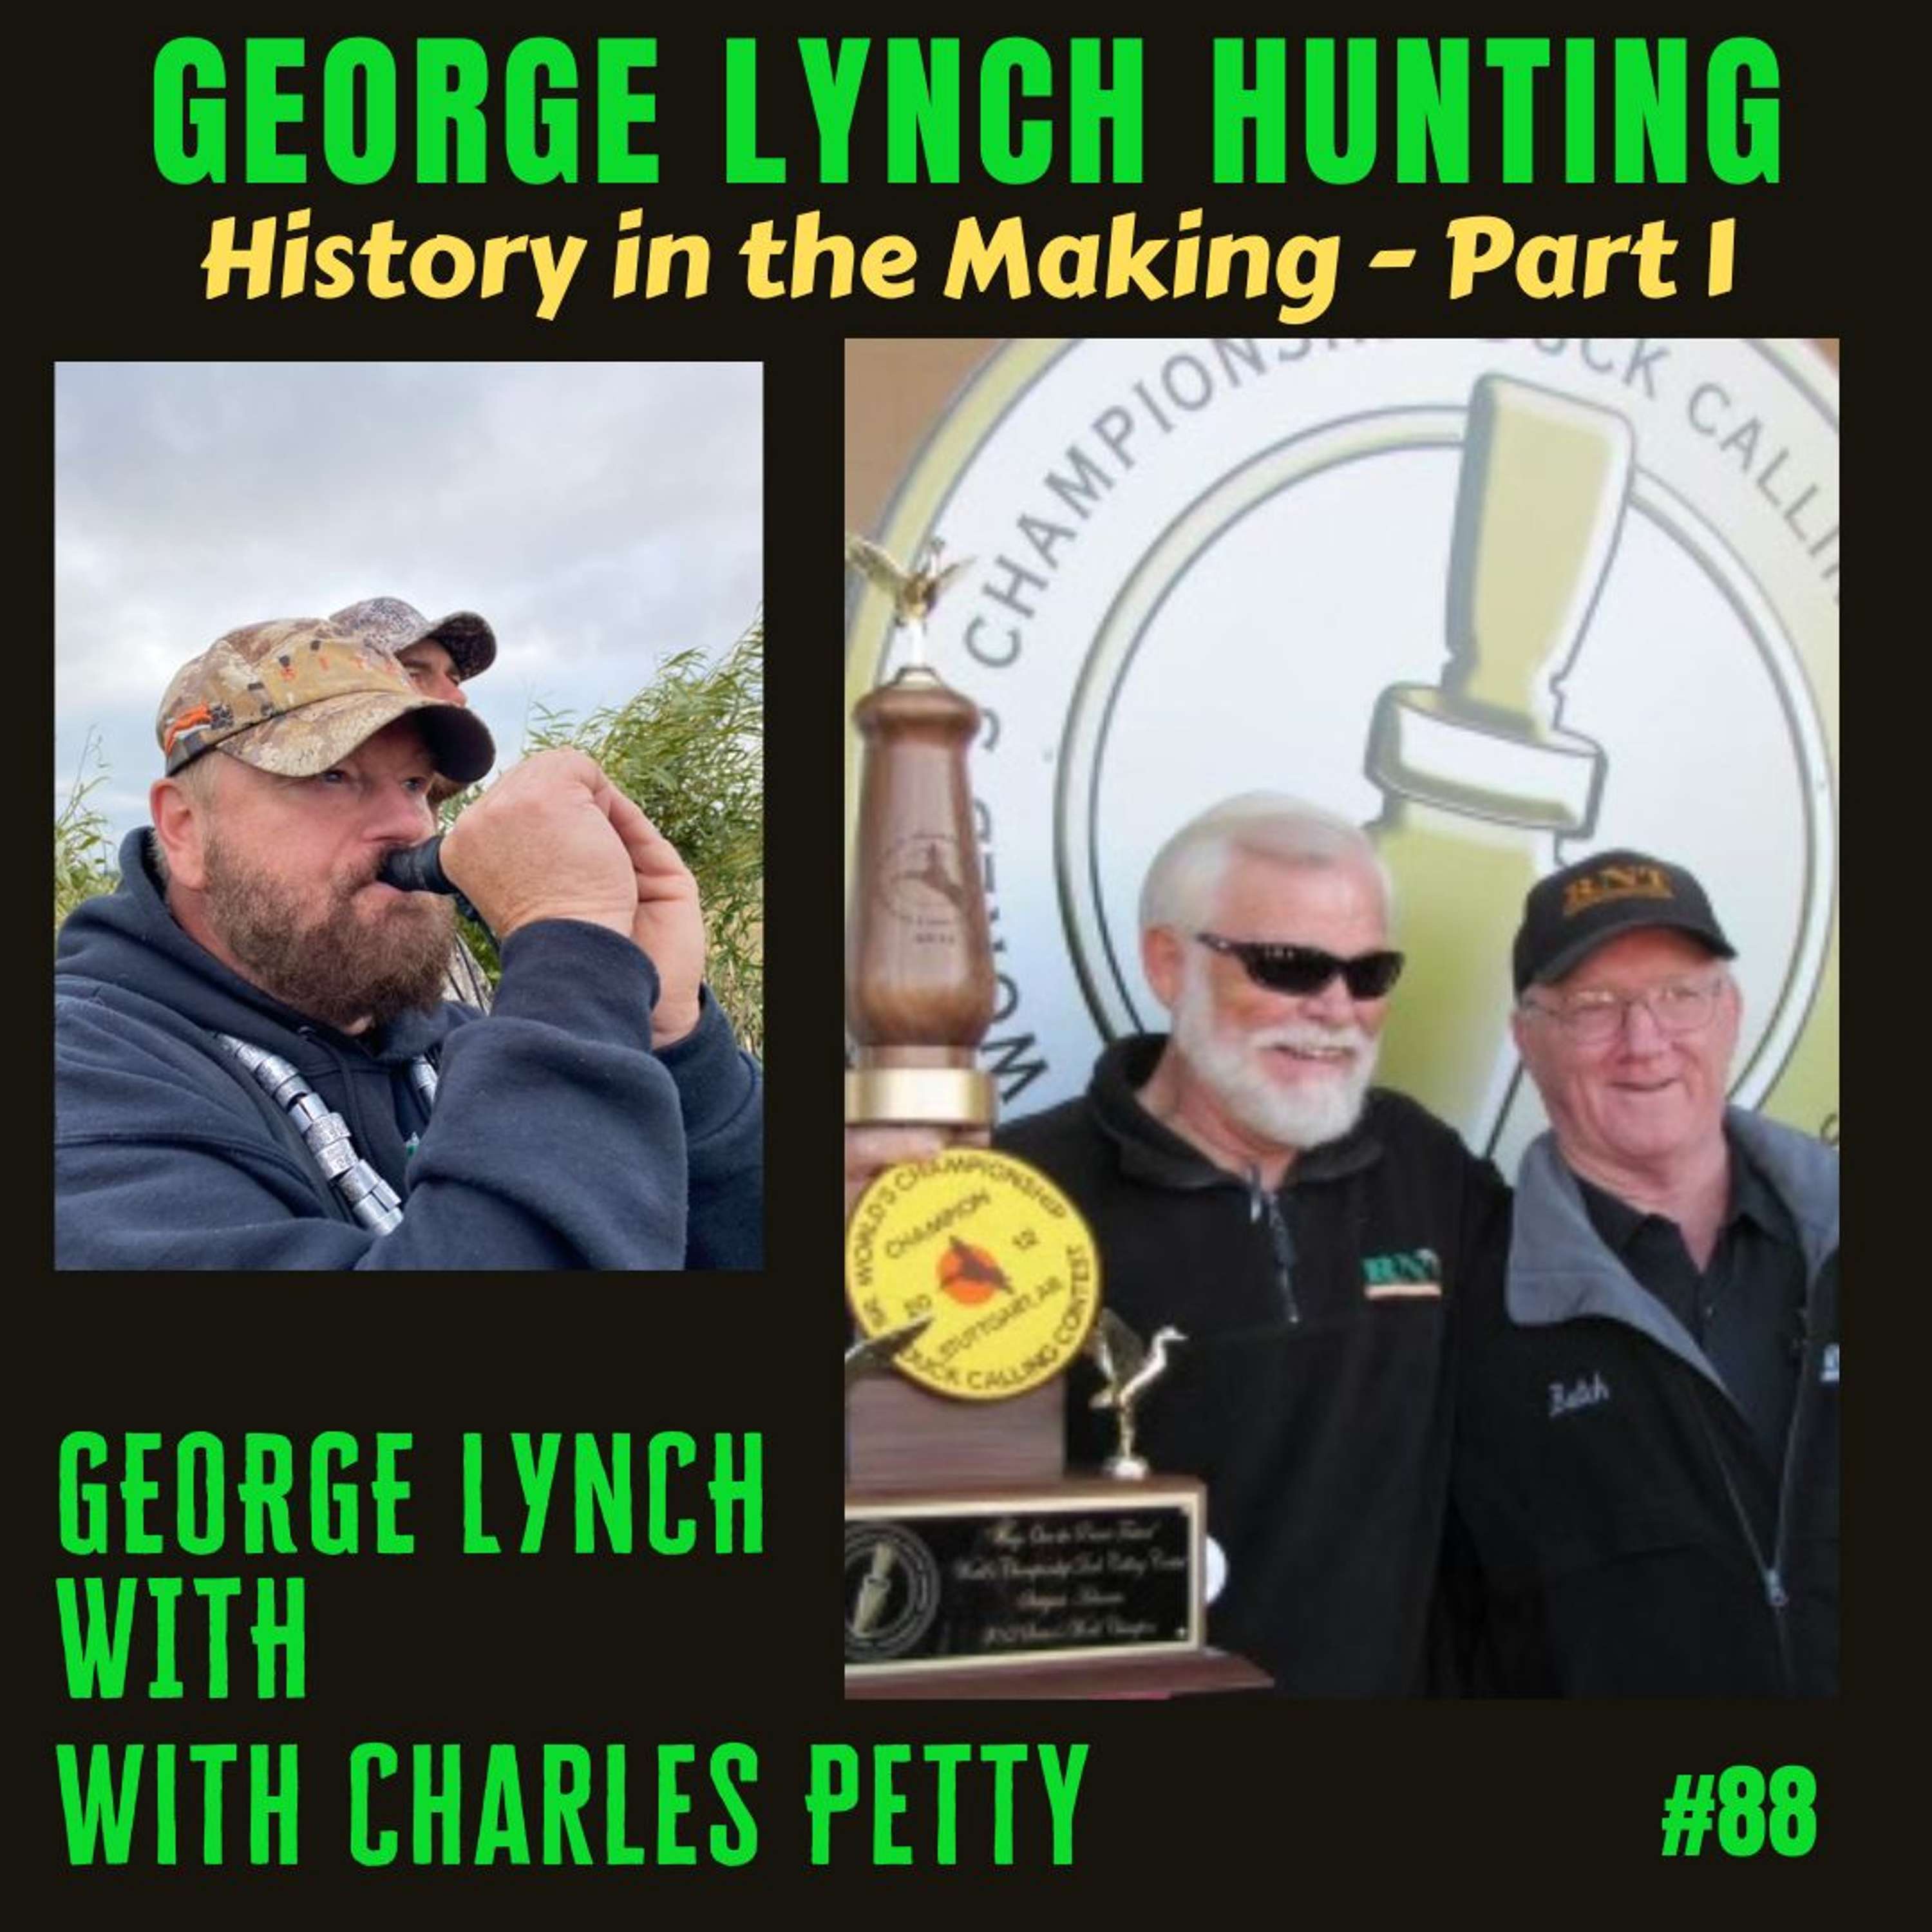 HISTORY IN THE MAKING Part 1 of 2 with guest CHARLES PETTY by GEORGE LYNCH